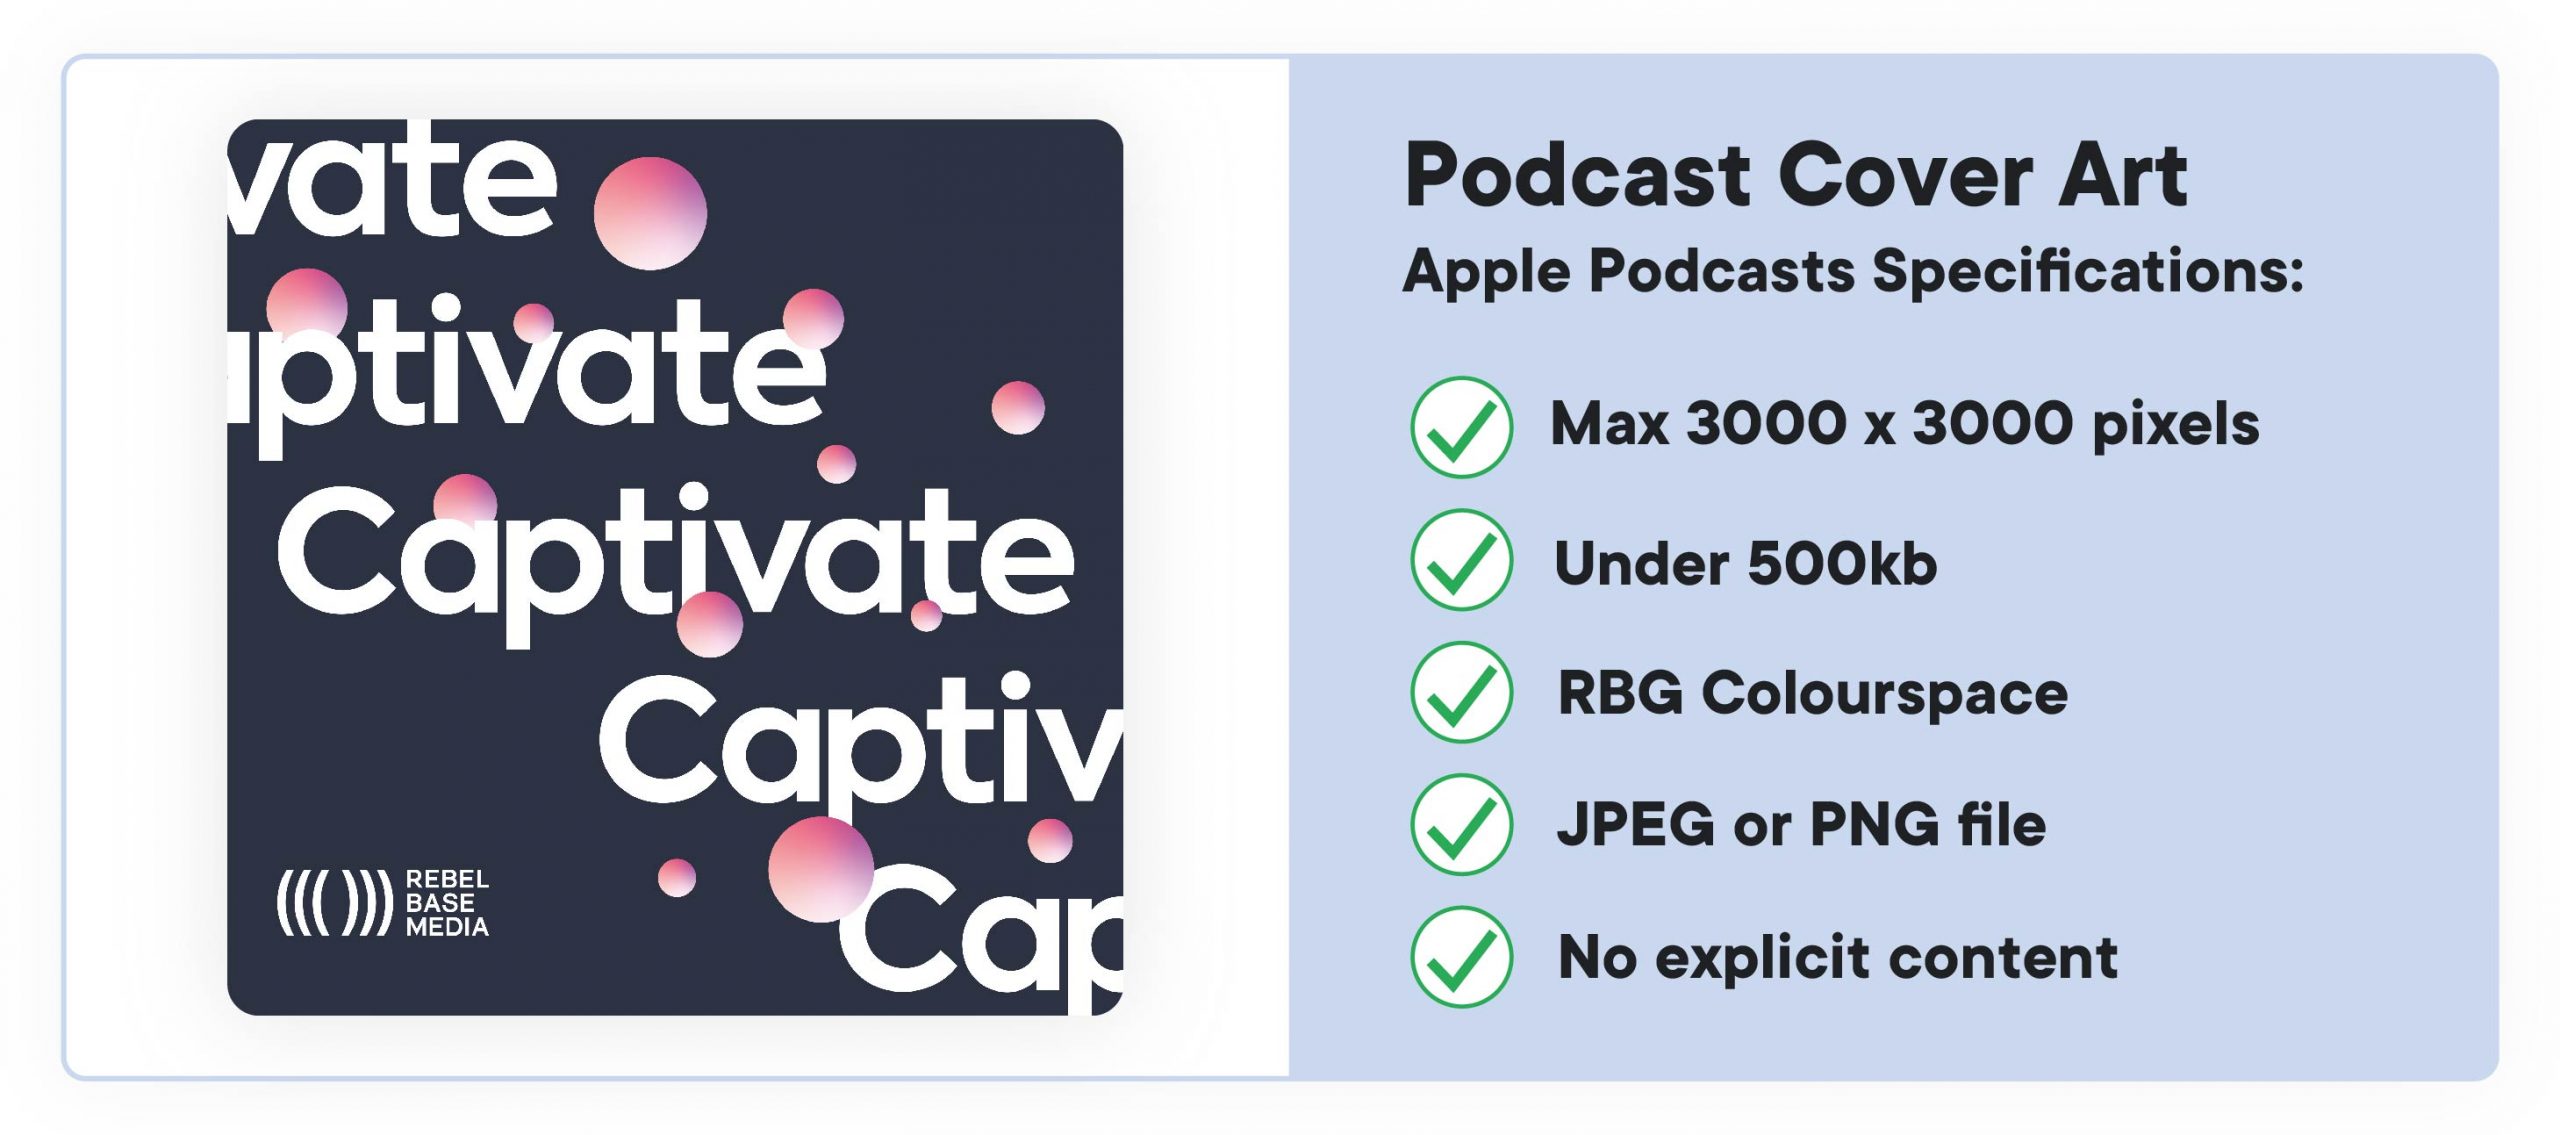 How to start a podcast: cover art specs. According to Apple, cover art must be: 3000 x 3000 pixels, RGB colourspace, jpeg OR png, under 500kb.